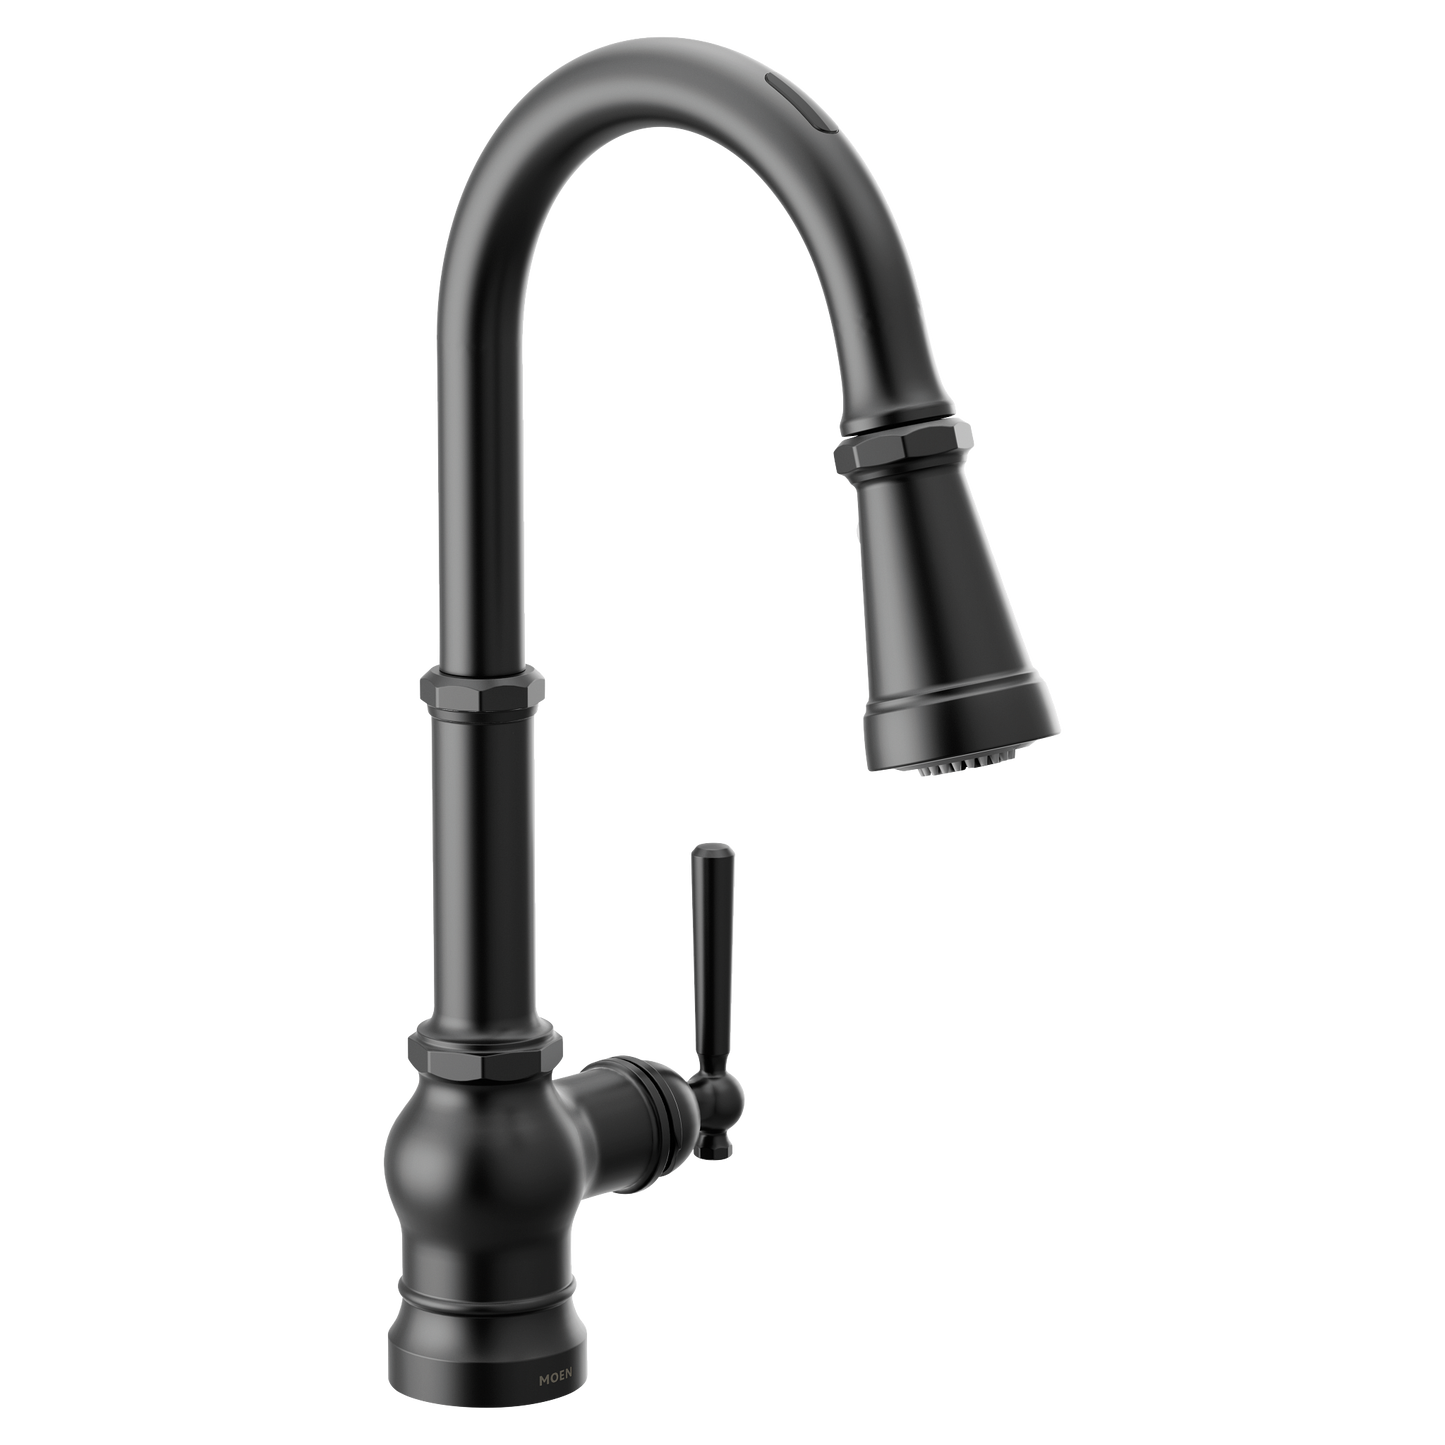 Paterson Motion Control Smart Kitchen One-Handle High Arc Pulldown Faucet